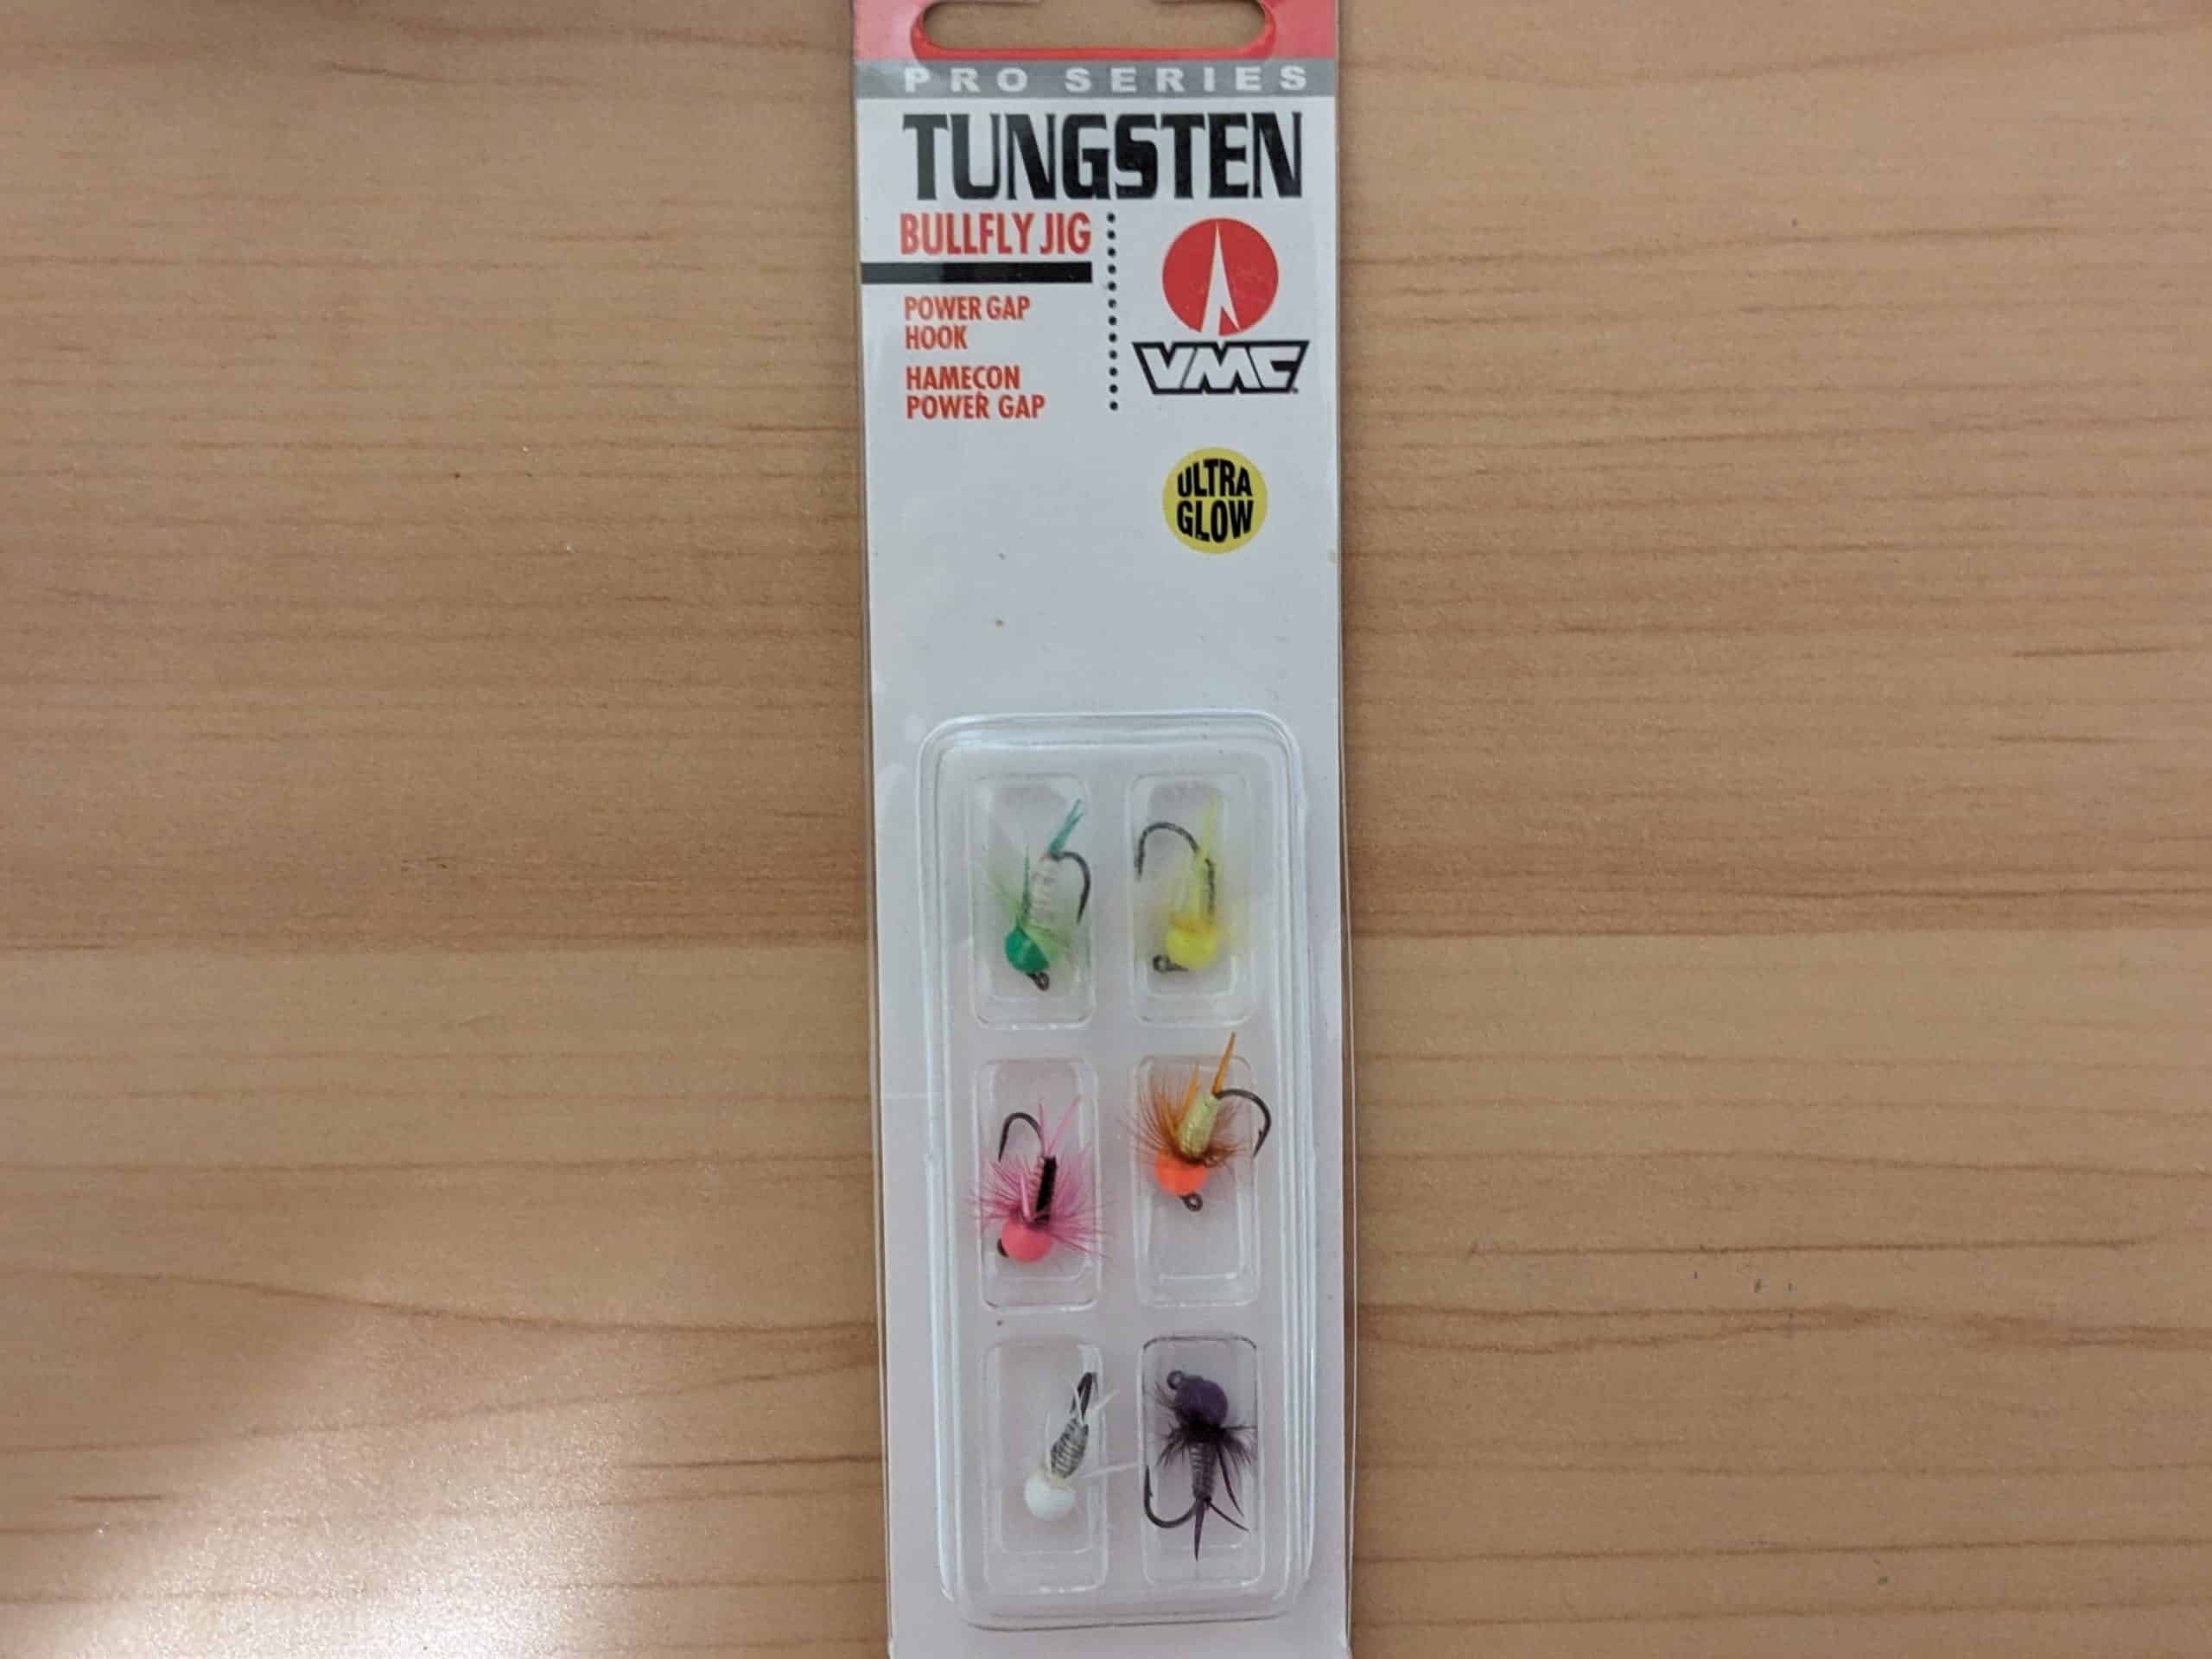 Tungsten jigs that are a great alternative for ice fishing for bass